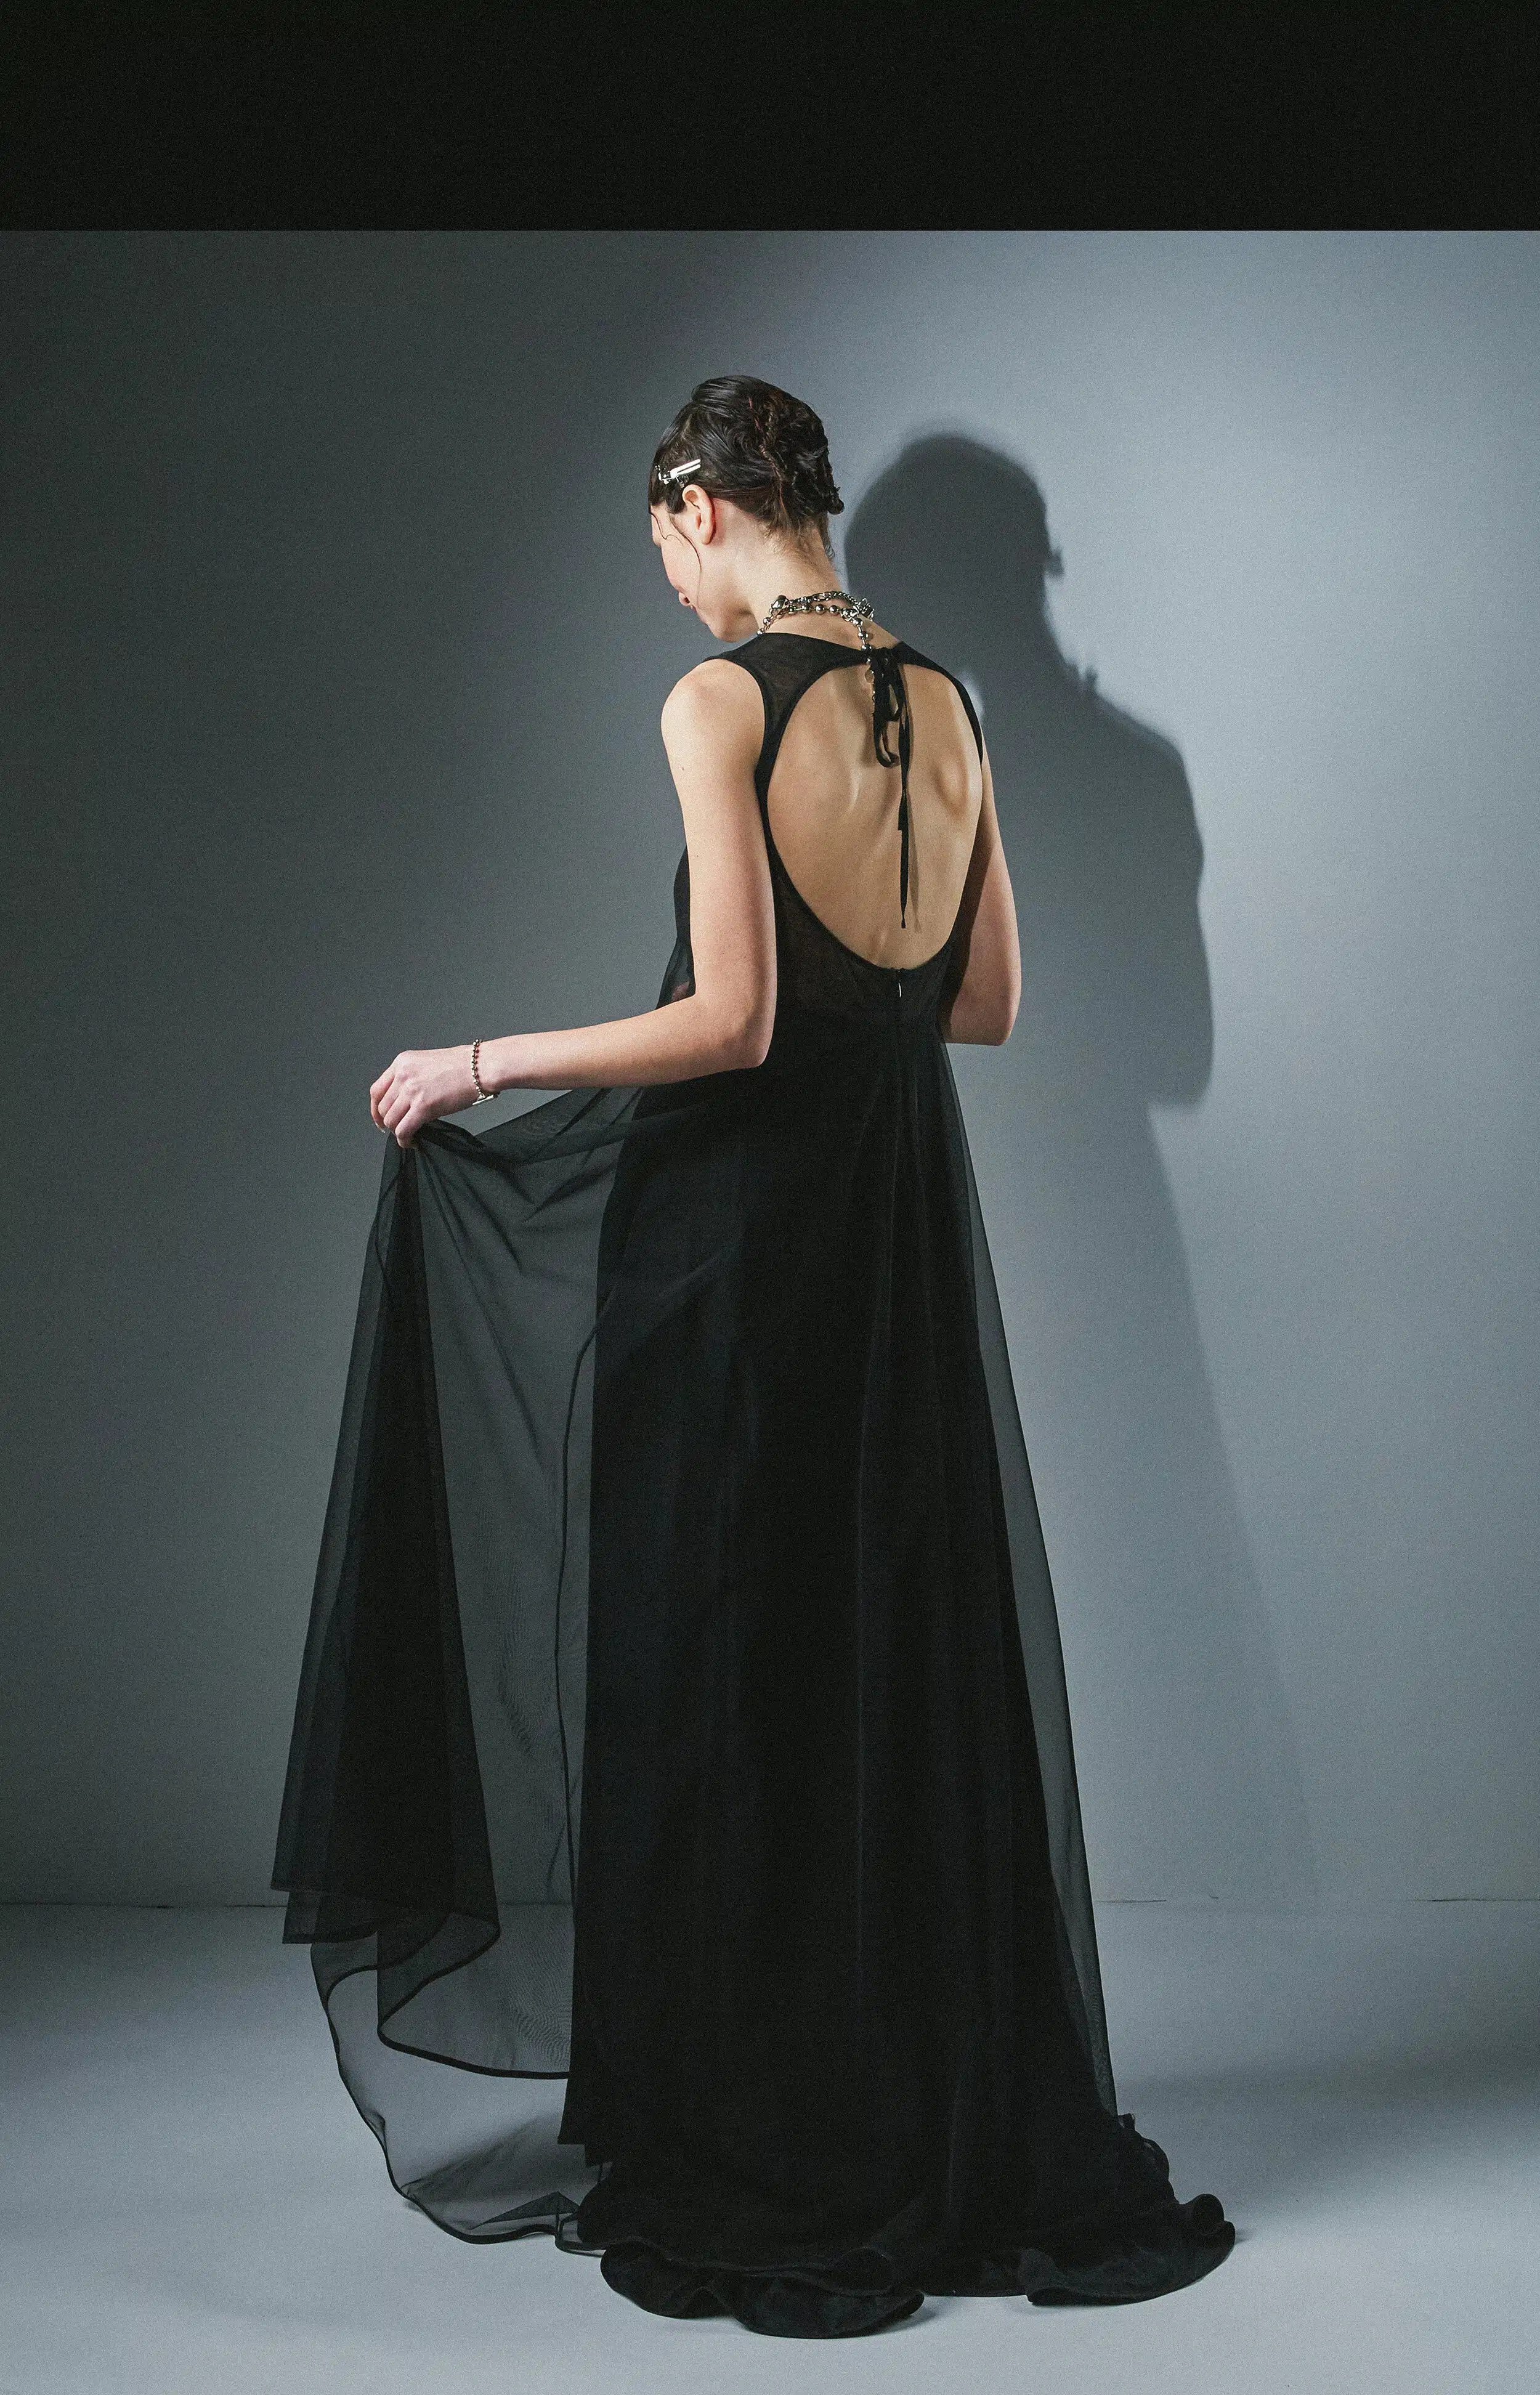 Image from FW20 Collection